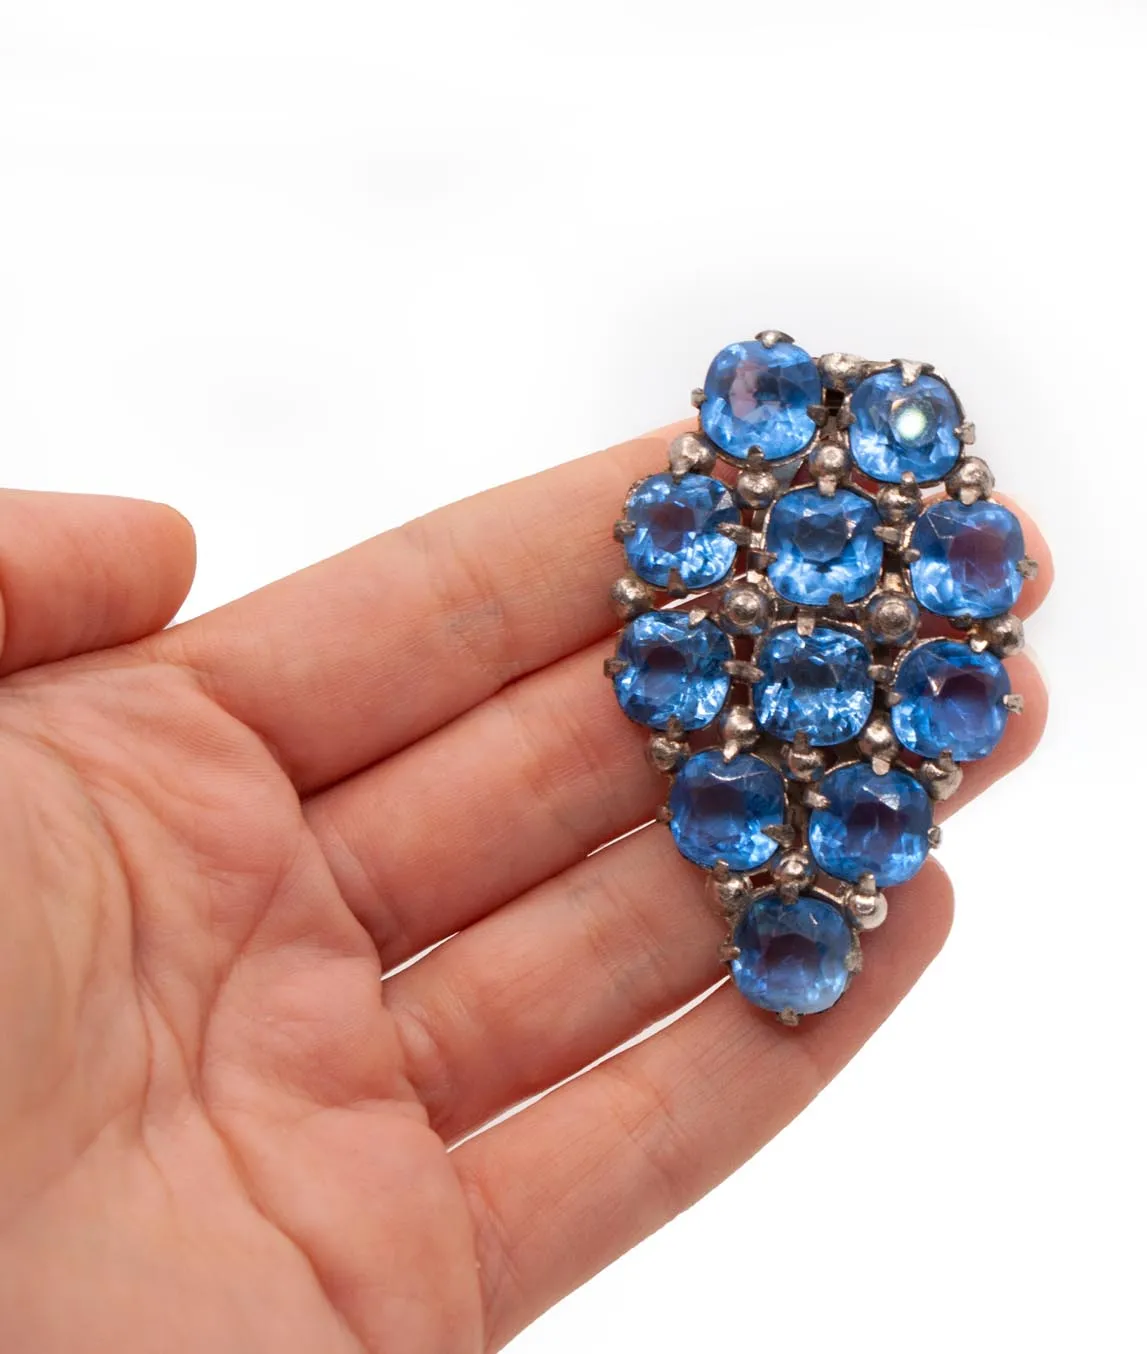 Blue glass dress clip held in a hand